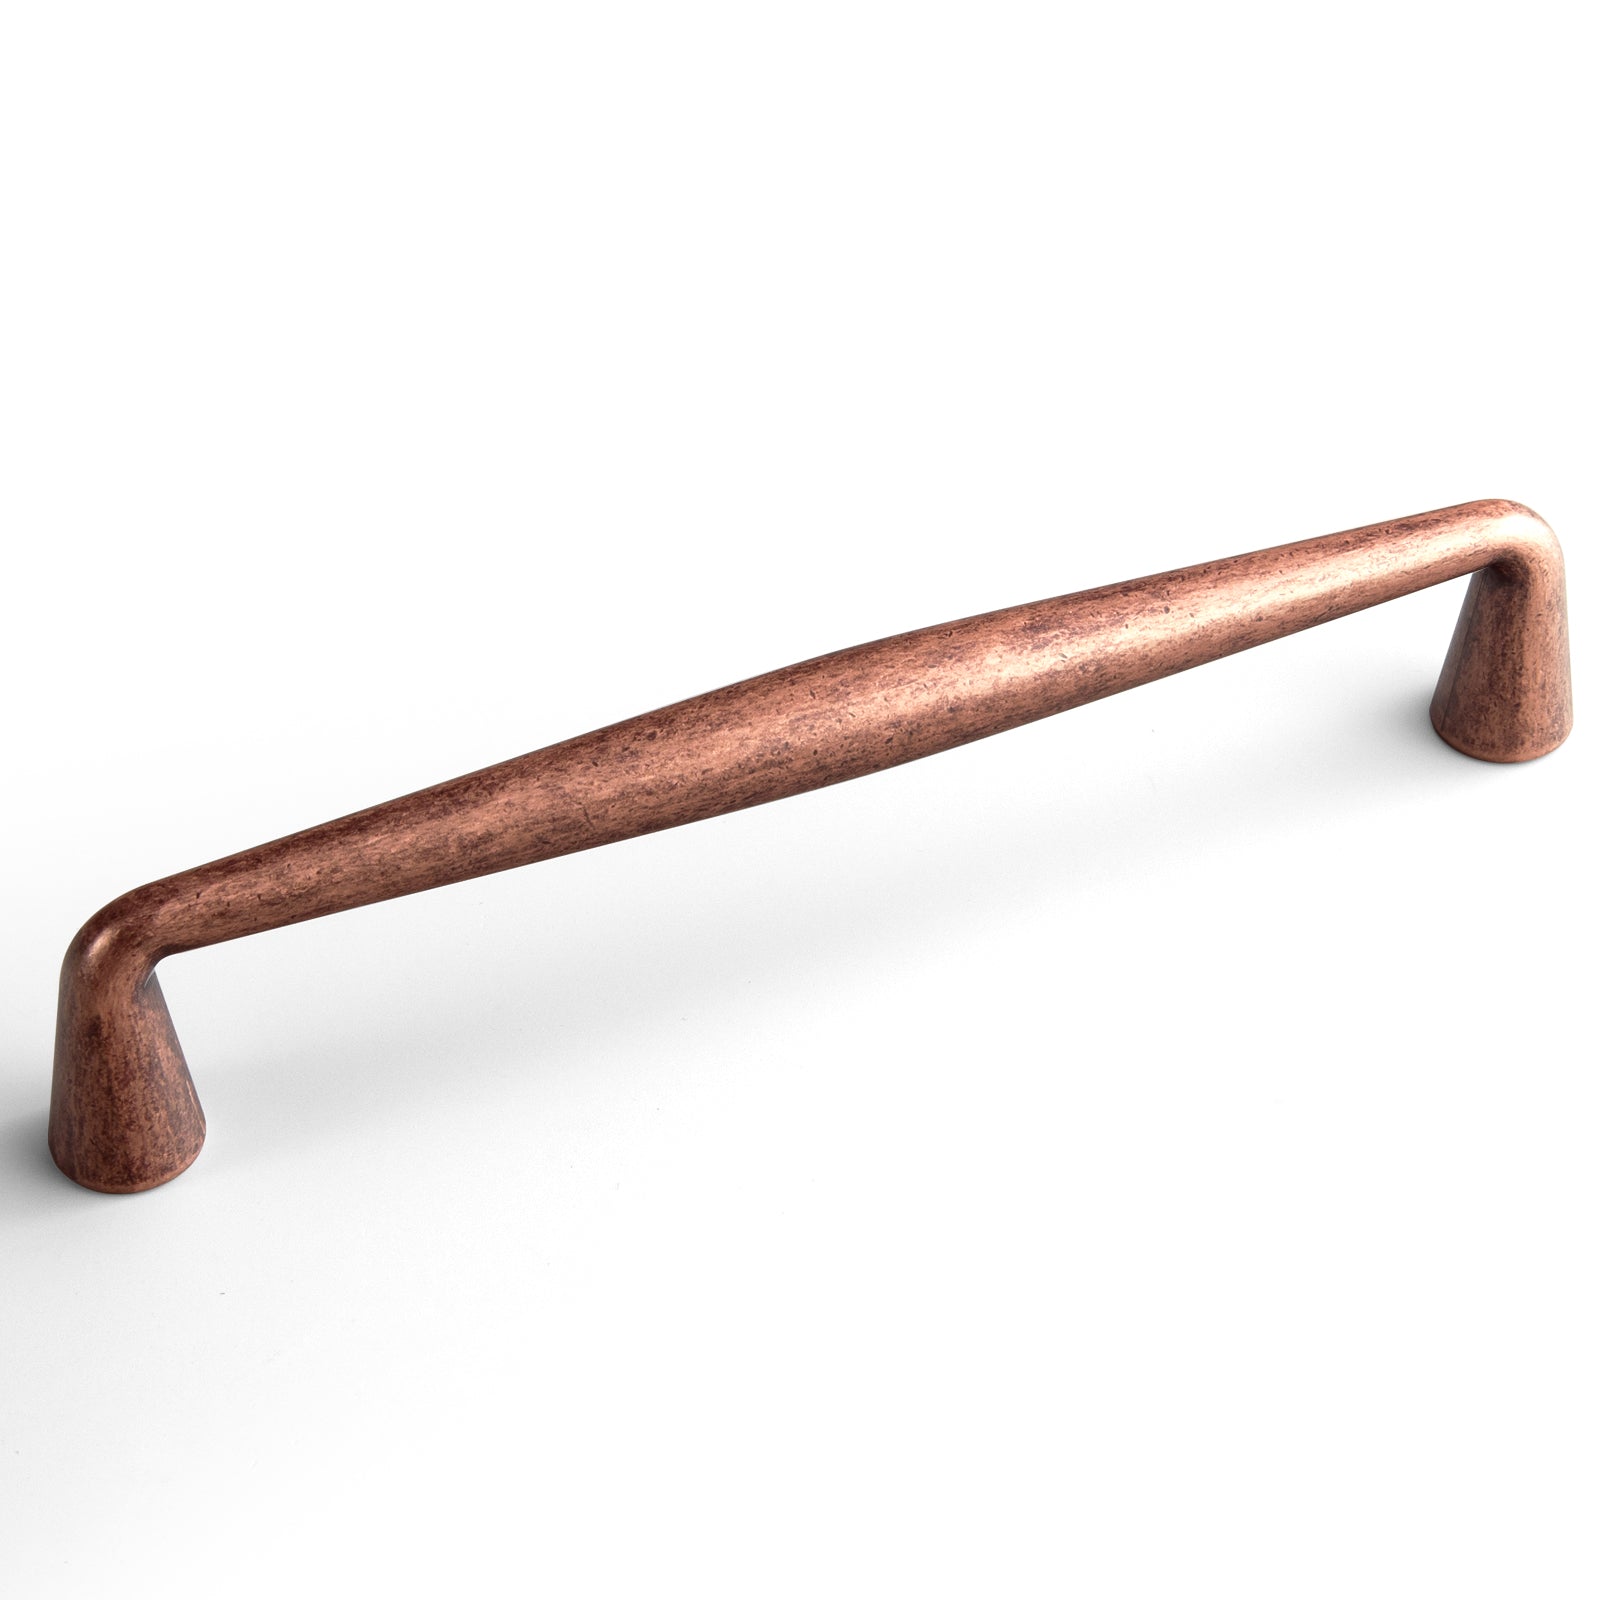 Goo-Ki Antique Copper / 5.03'' Hole Center Retro Durable Cabinet Pulls Luxurious Drawer Pulls for Bedroom Kitchen 6 Pack